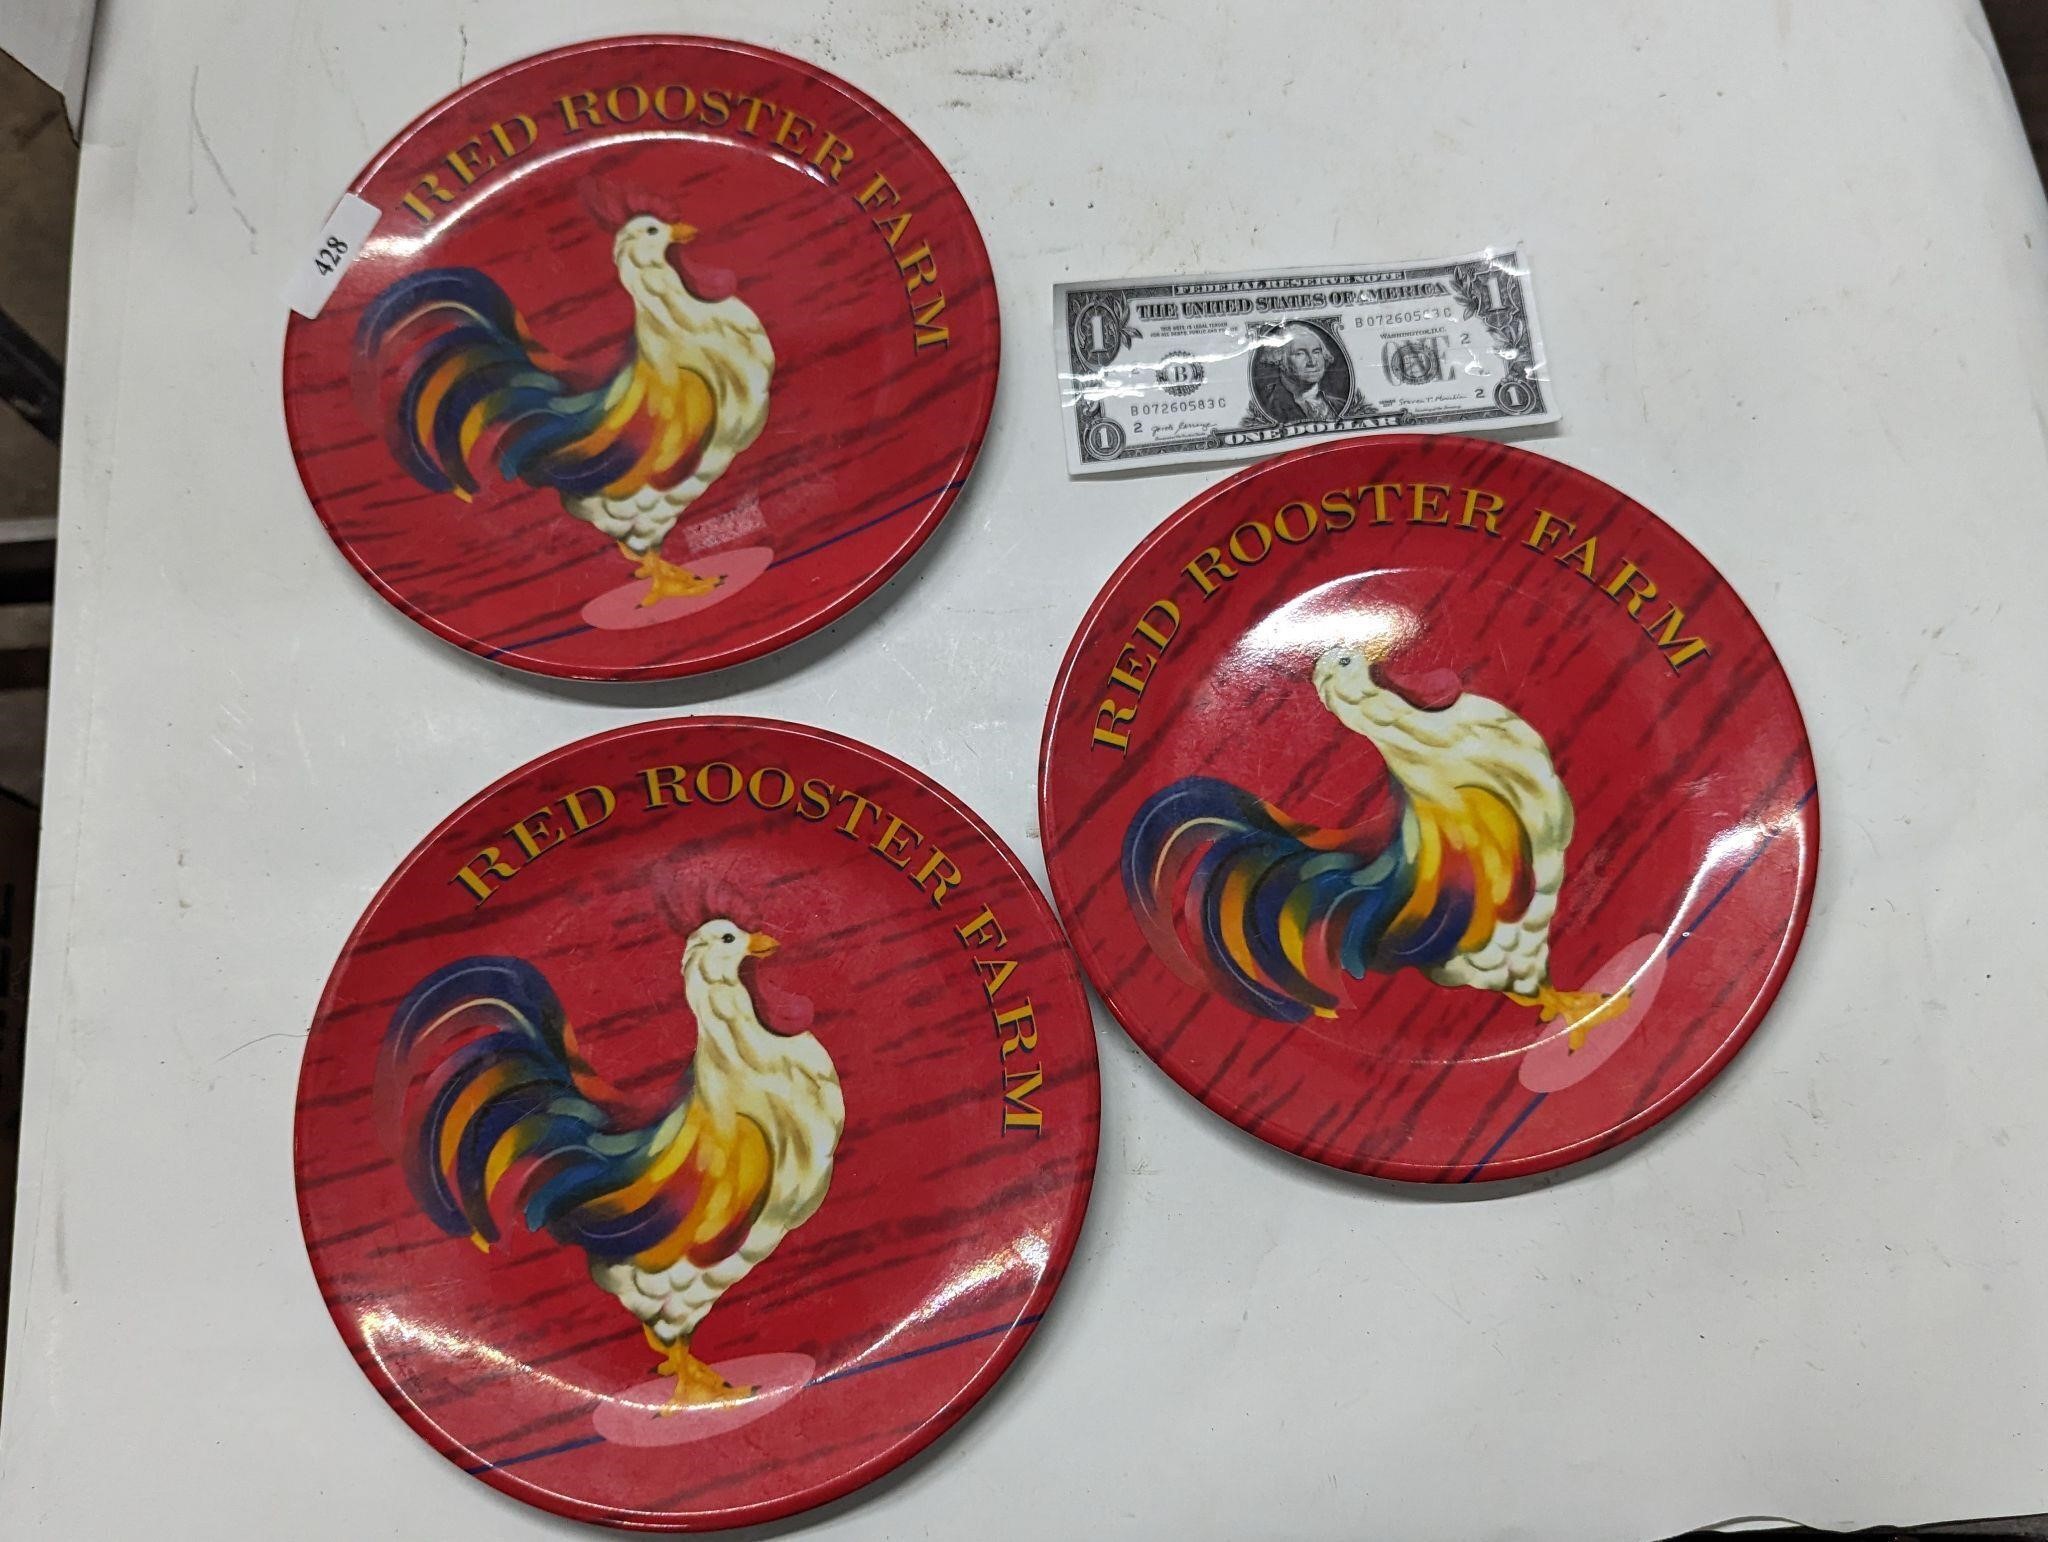 3 red roosters plates